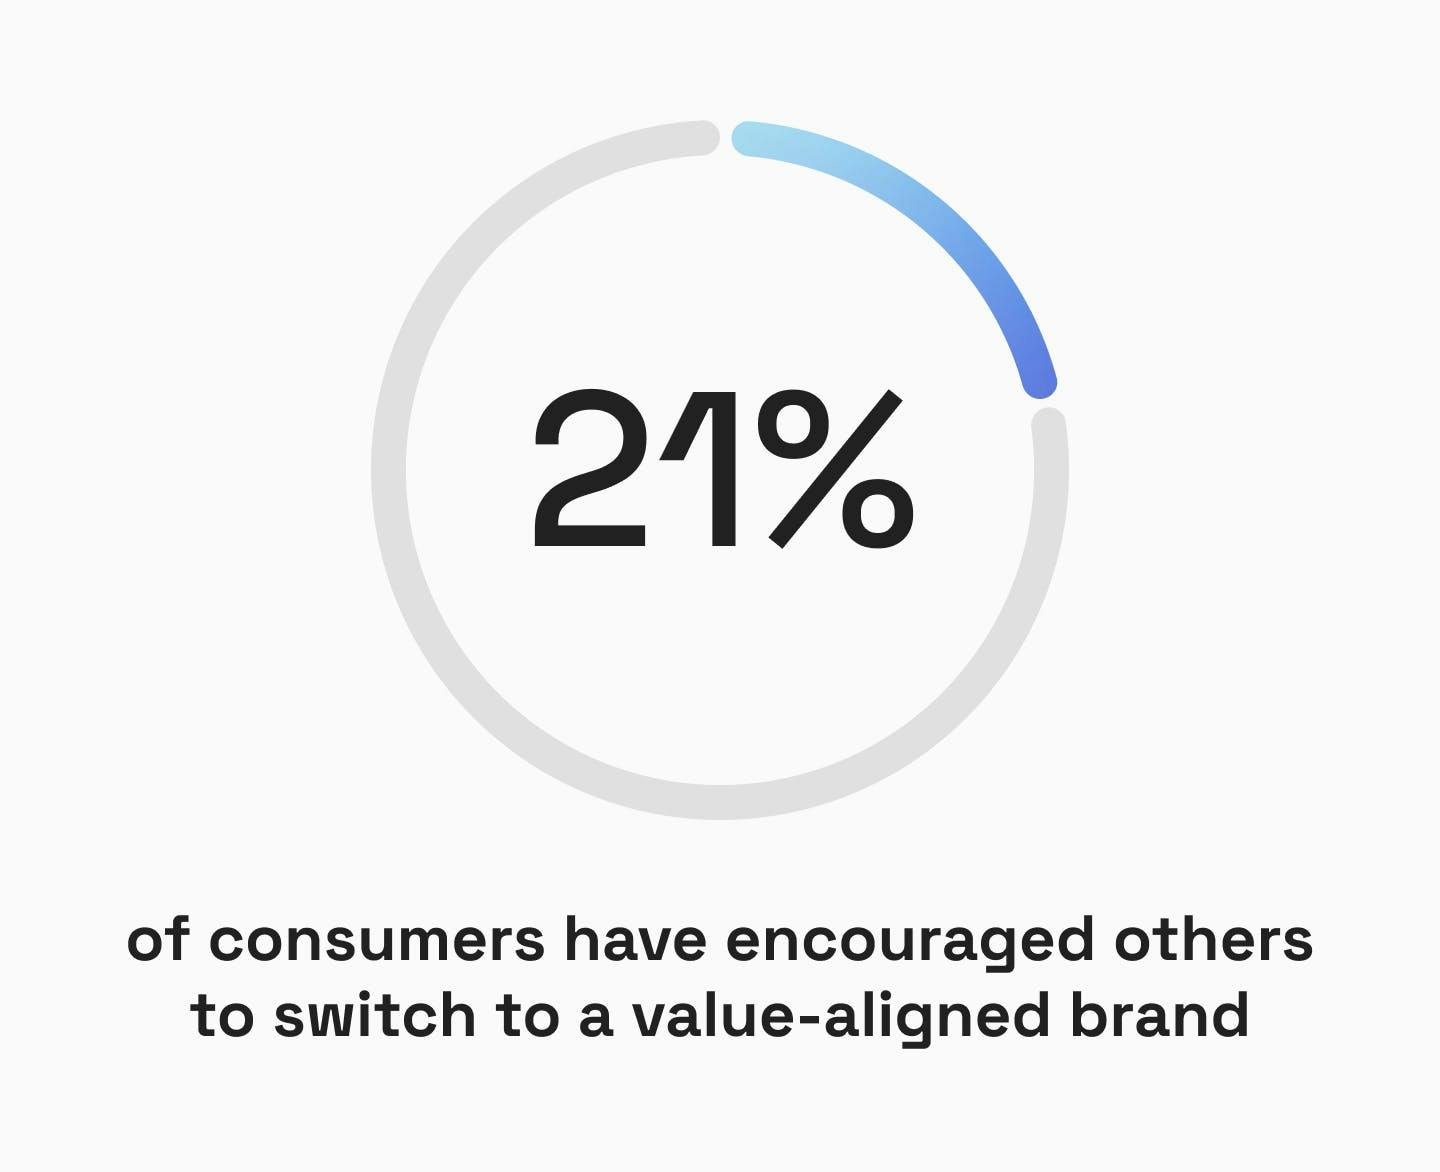 21% of consumers have encouraged others to switch to a value-aligned brand